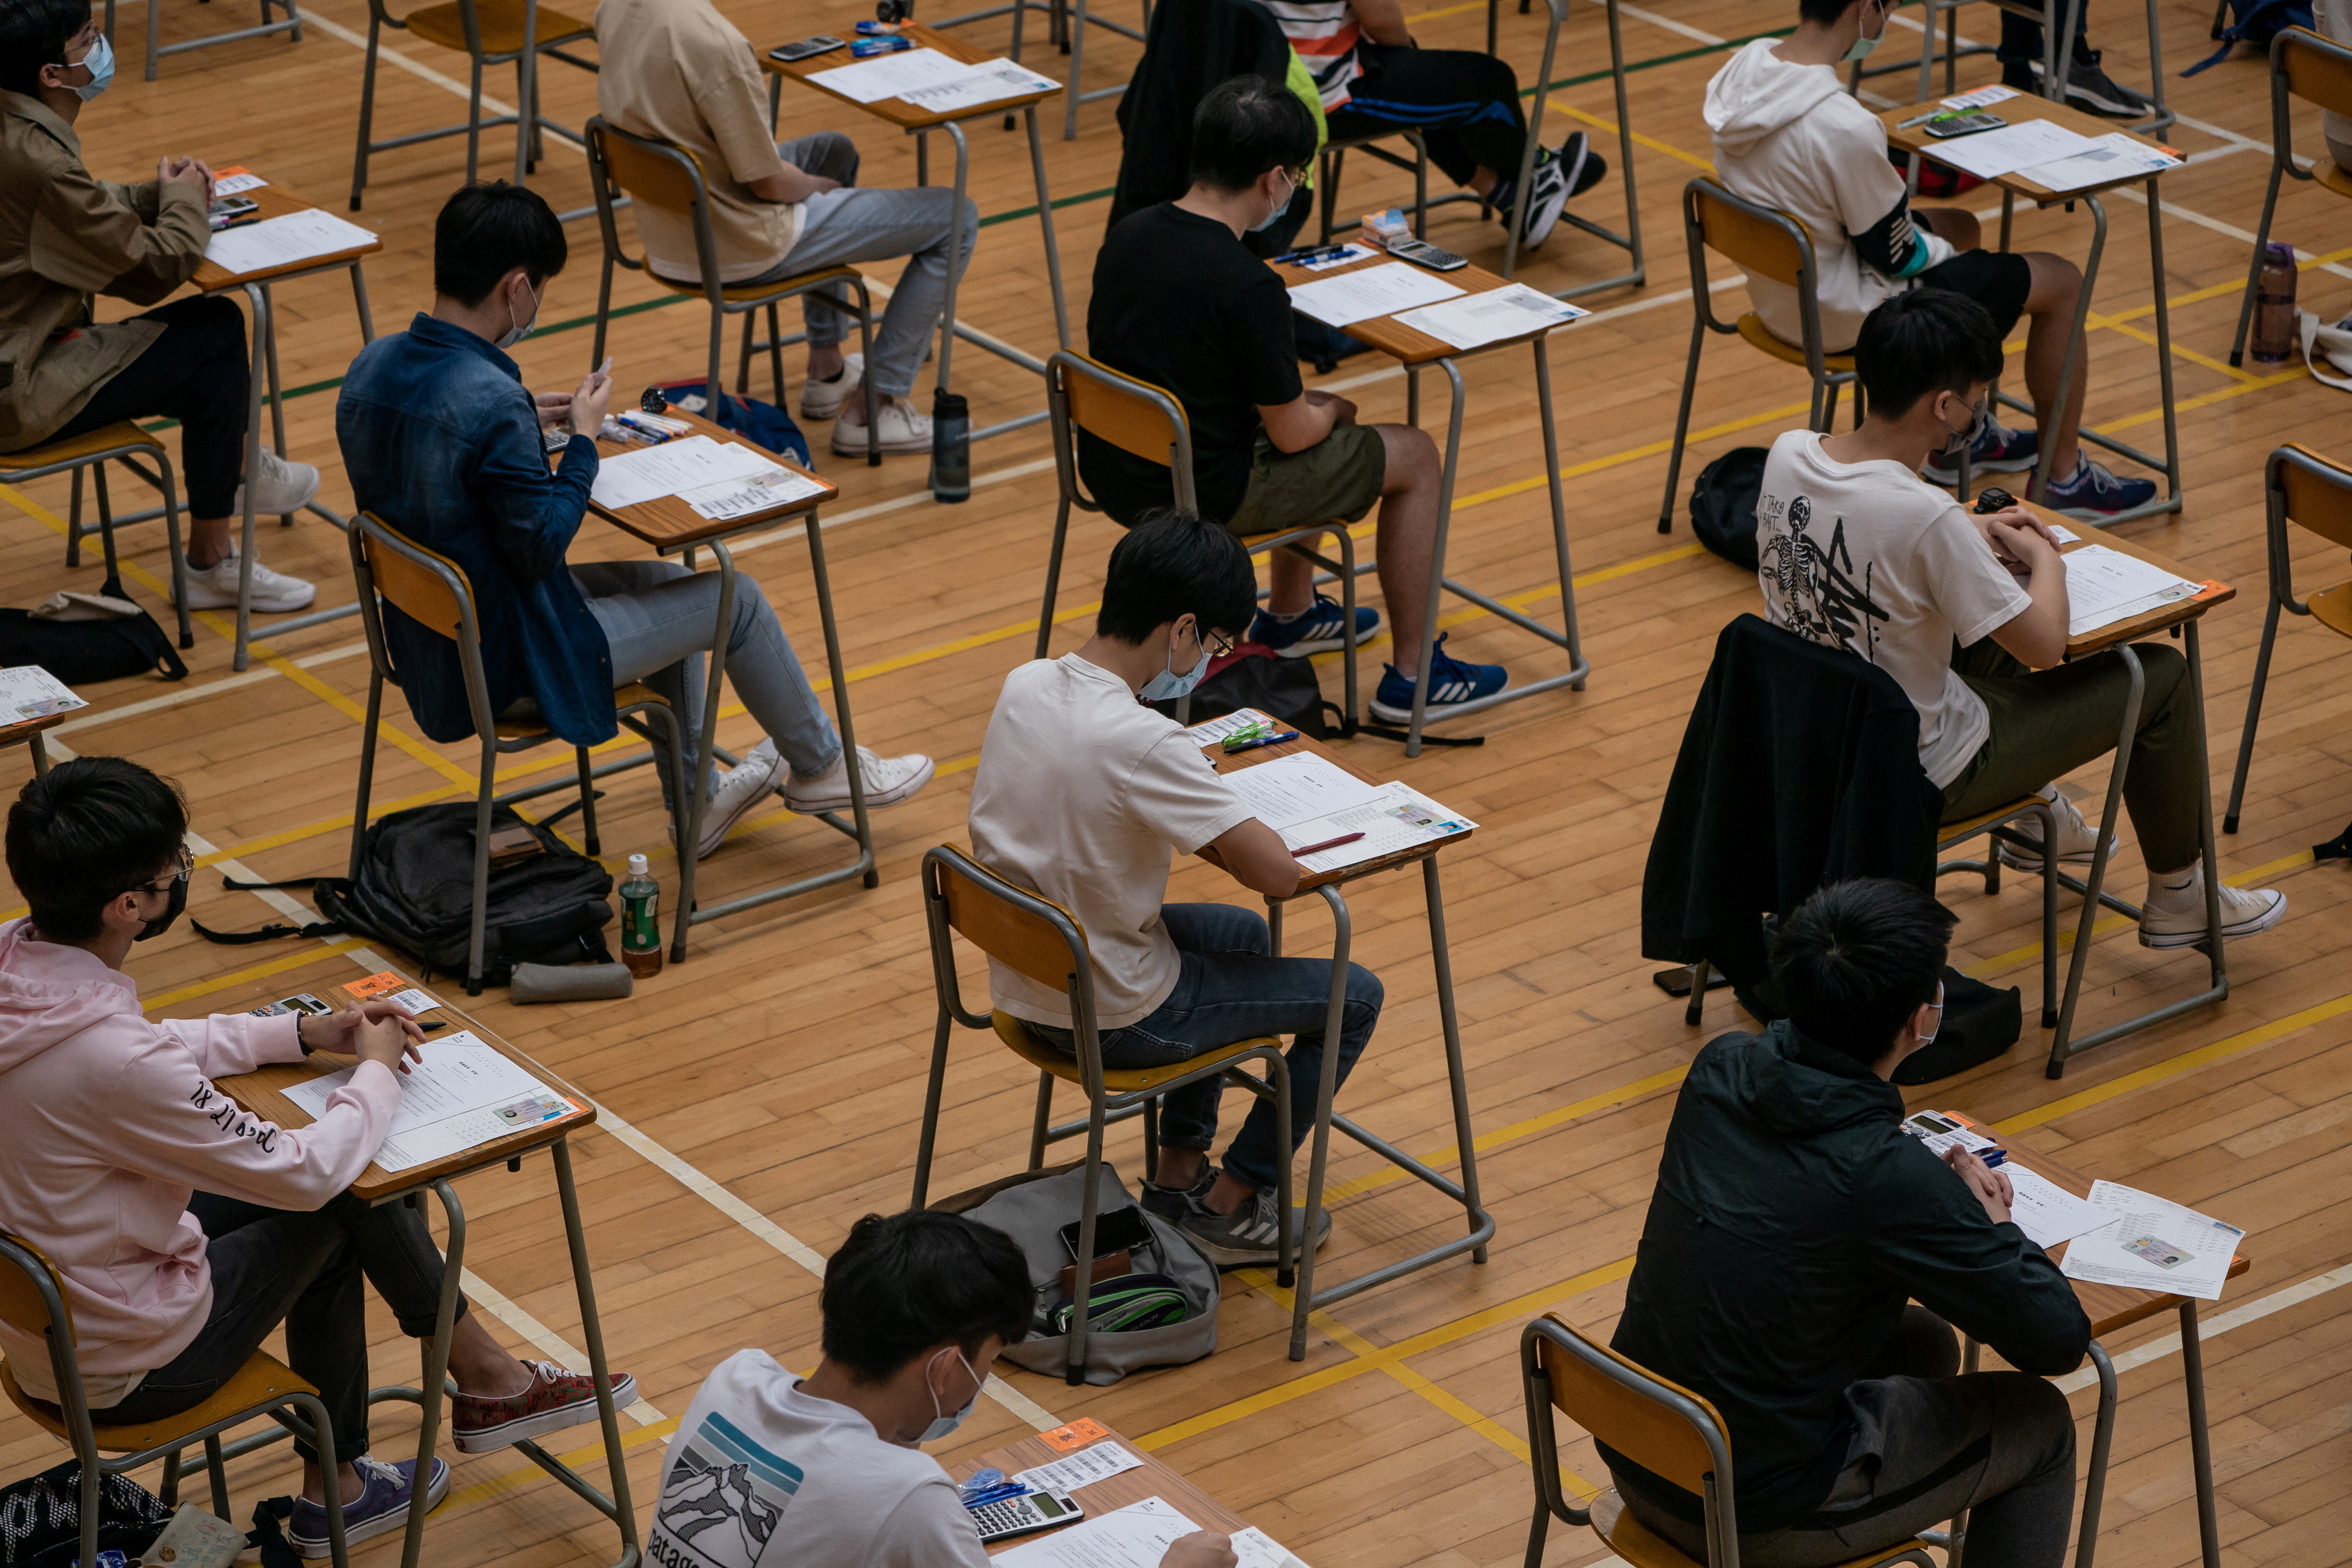 Students sit for the Diploma of Secondary Education (DSE) exams on April 26, 2021 in Hong Kong, China